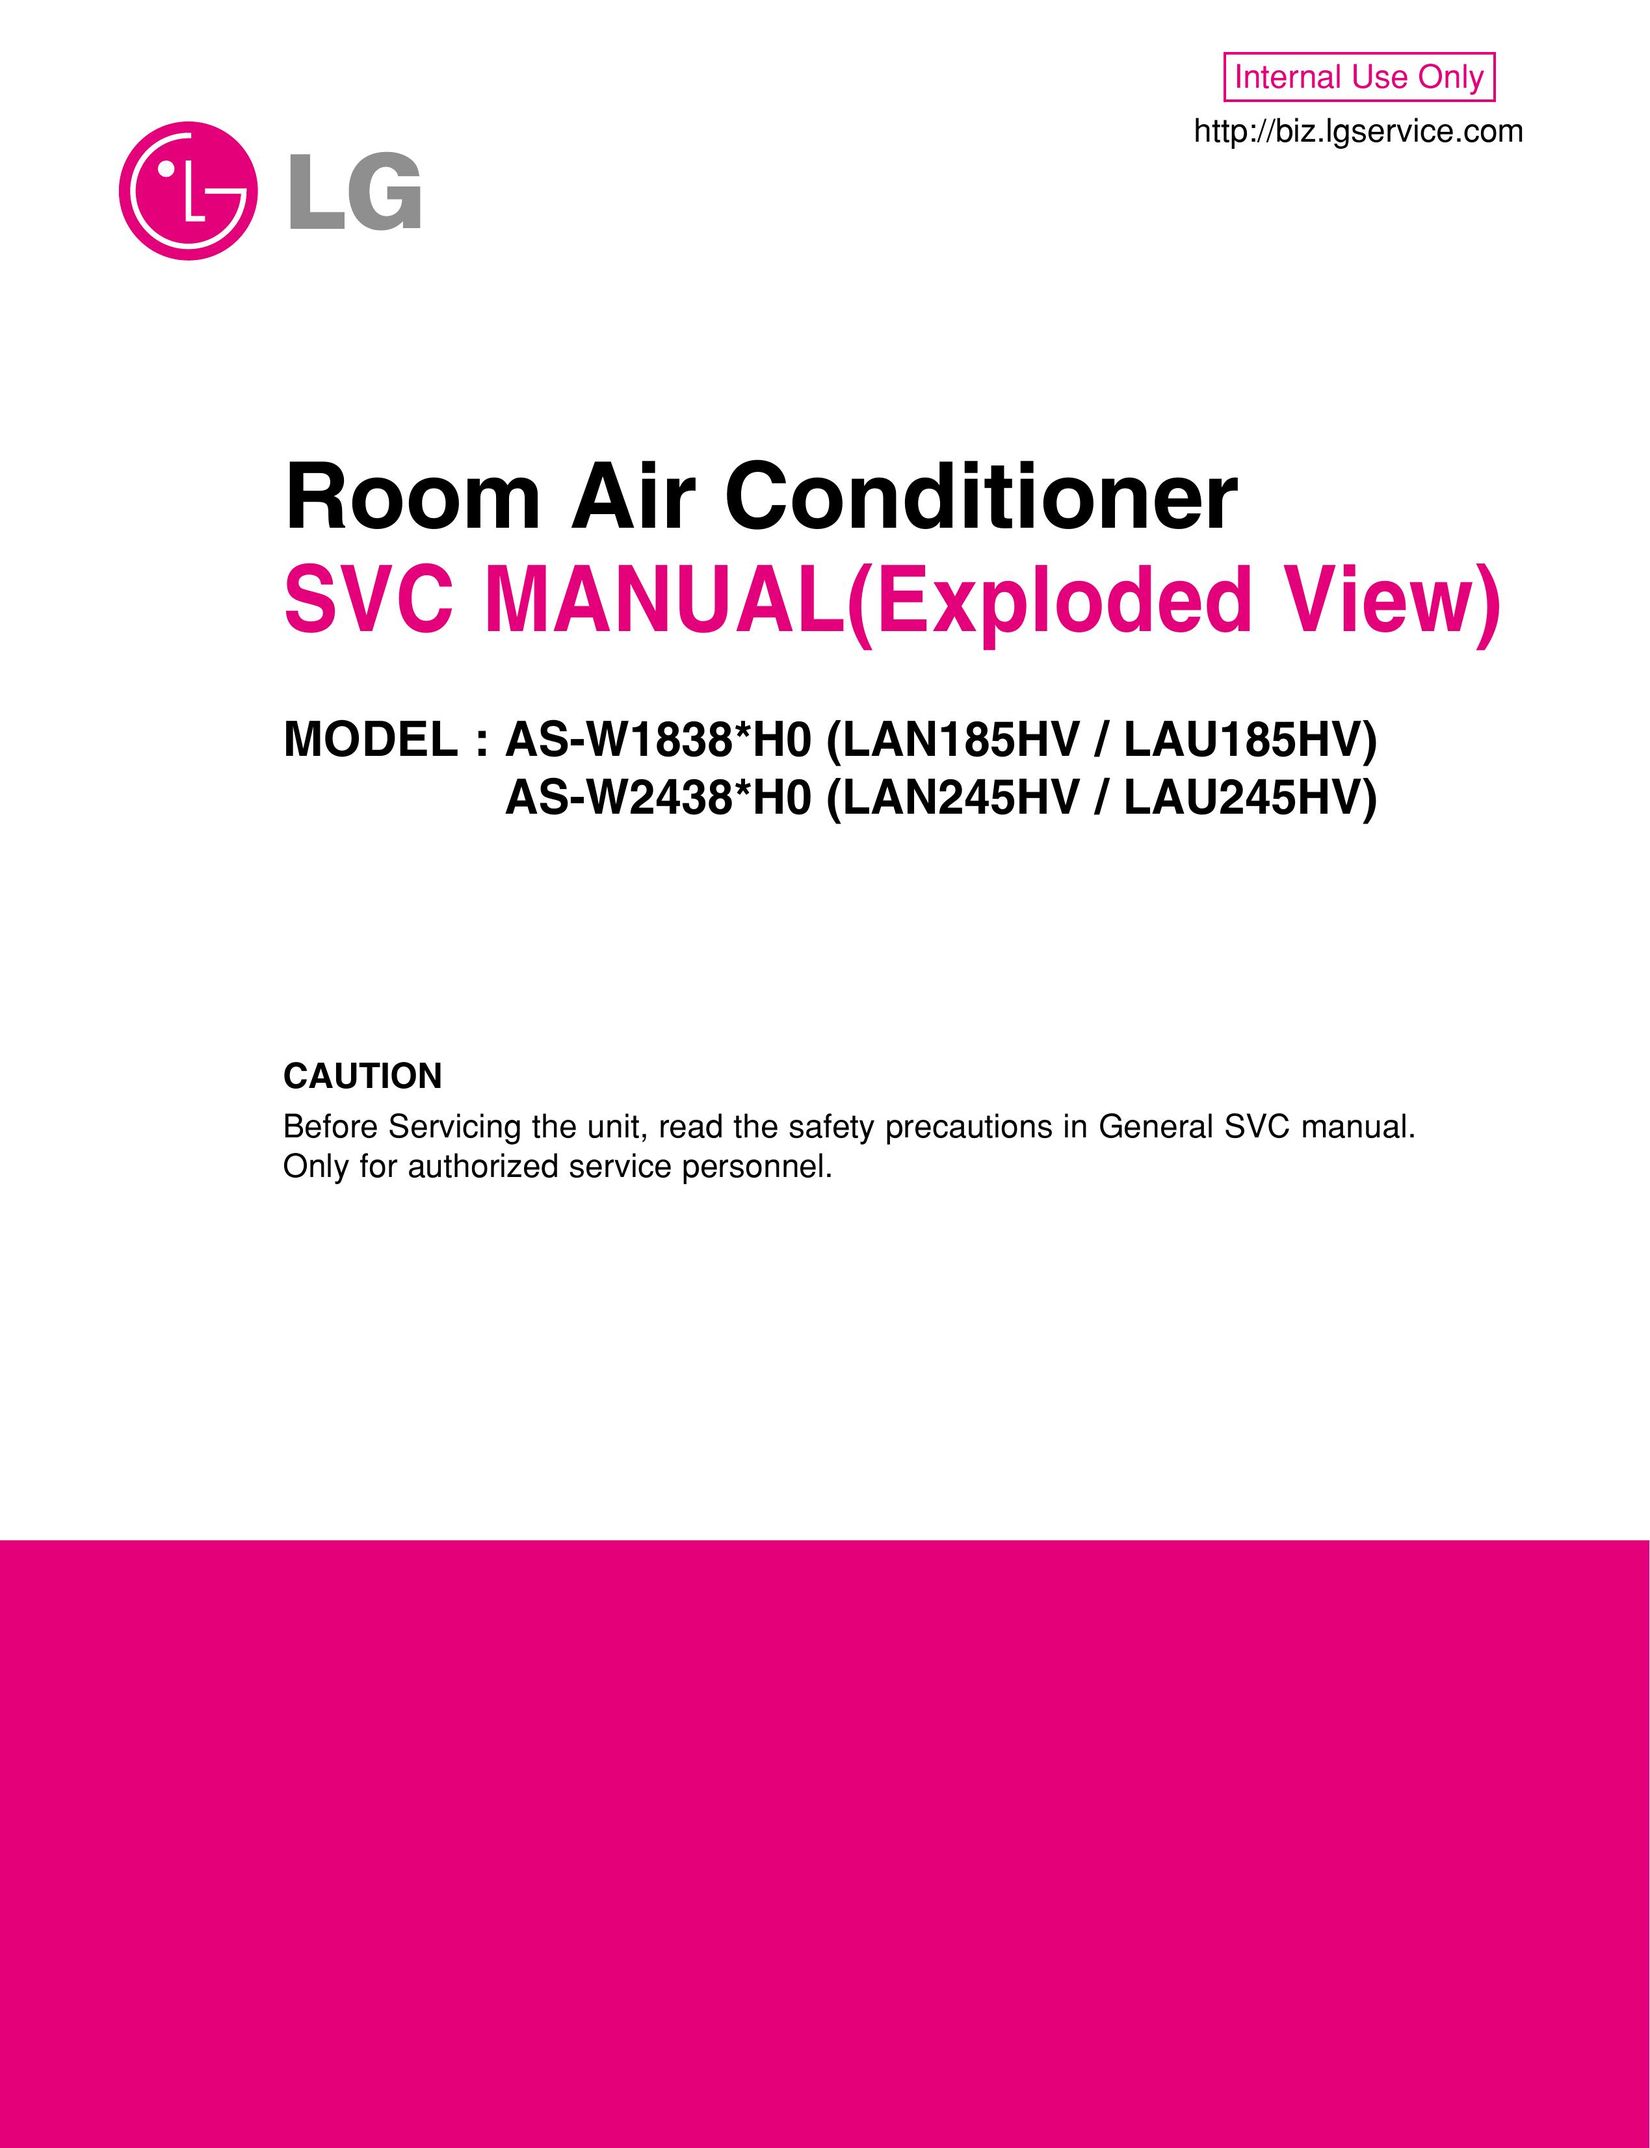 LG Electronics AS-W1838*H0 Air Conditioner User Manual